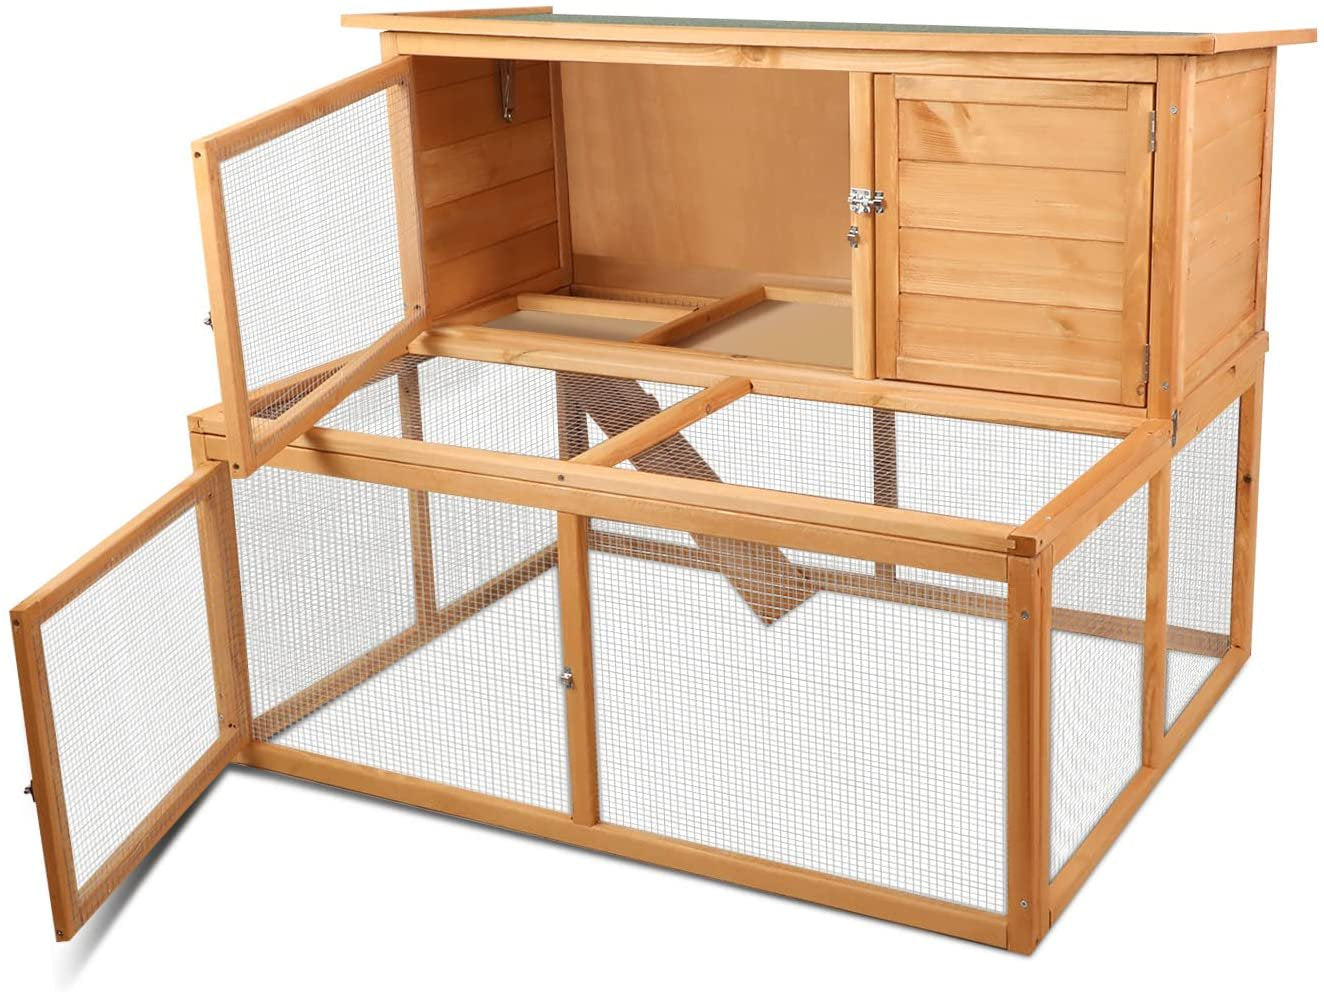 Magshion 43.6" L 2 Story Wooden Rabbit Hutch Water Resistant Openable Roof, Pull Out Tray,4 Door Safety Locking, Run Ramp, Bunny Cage, Rabbit House, Guinea, Chicken, Small Animals Habitat